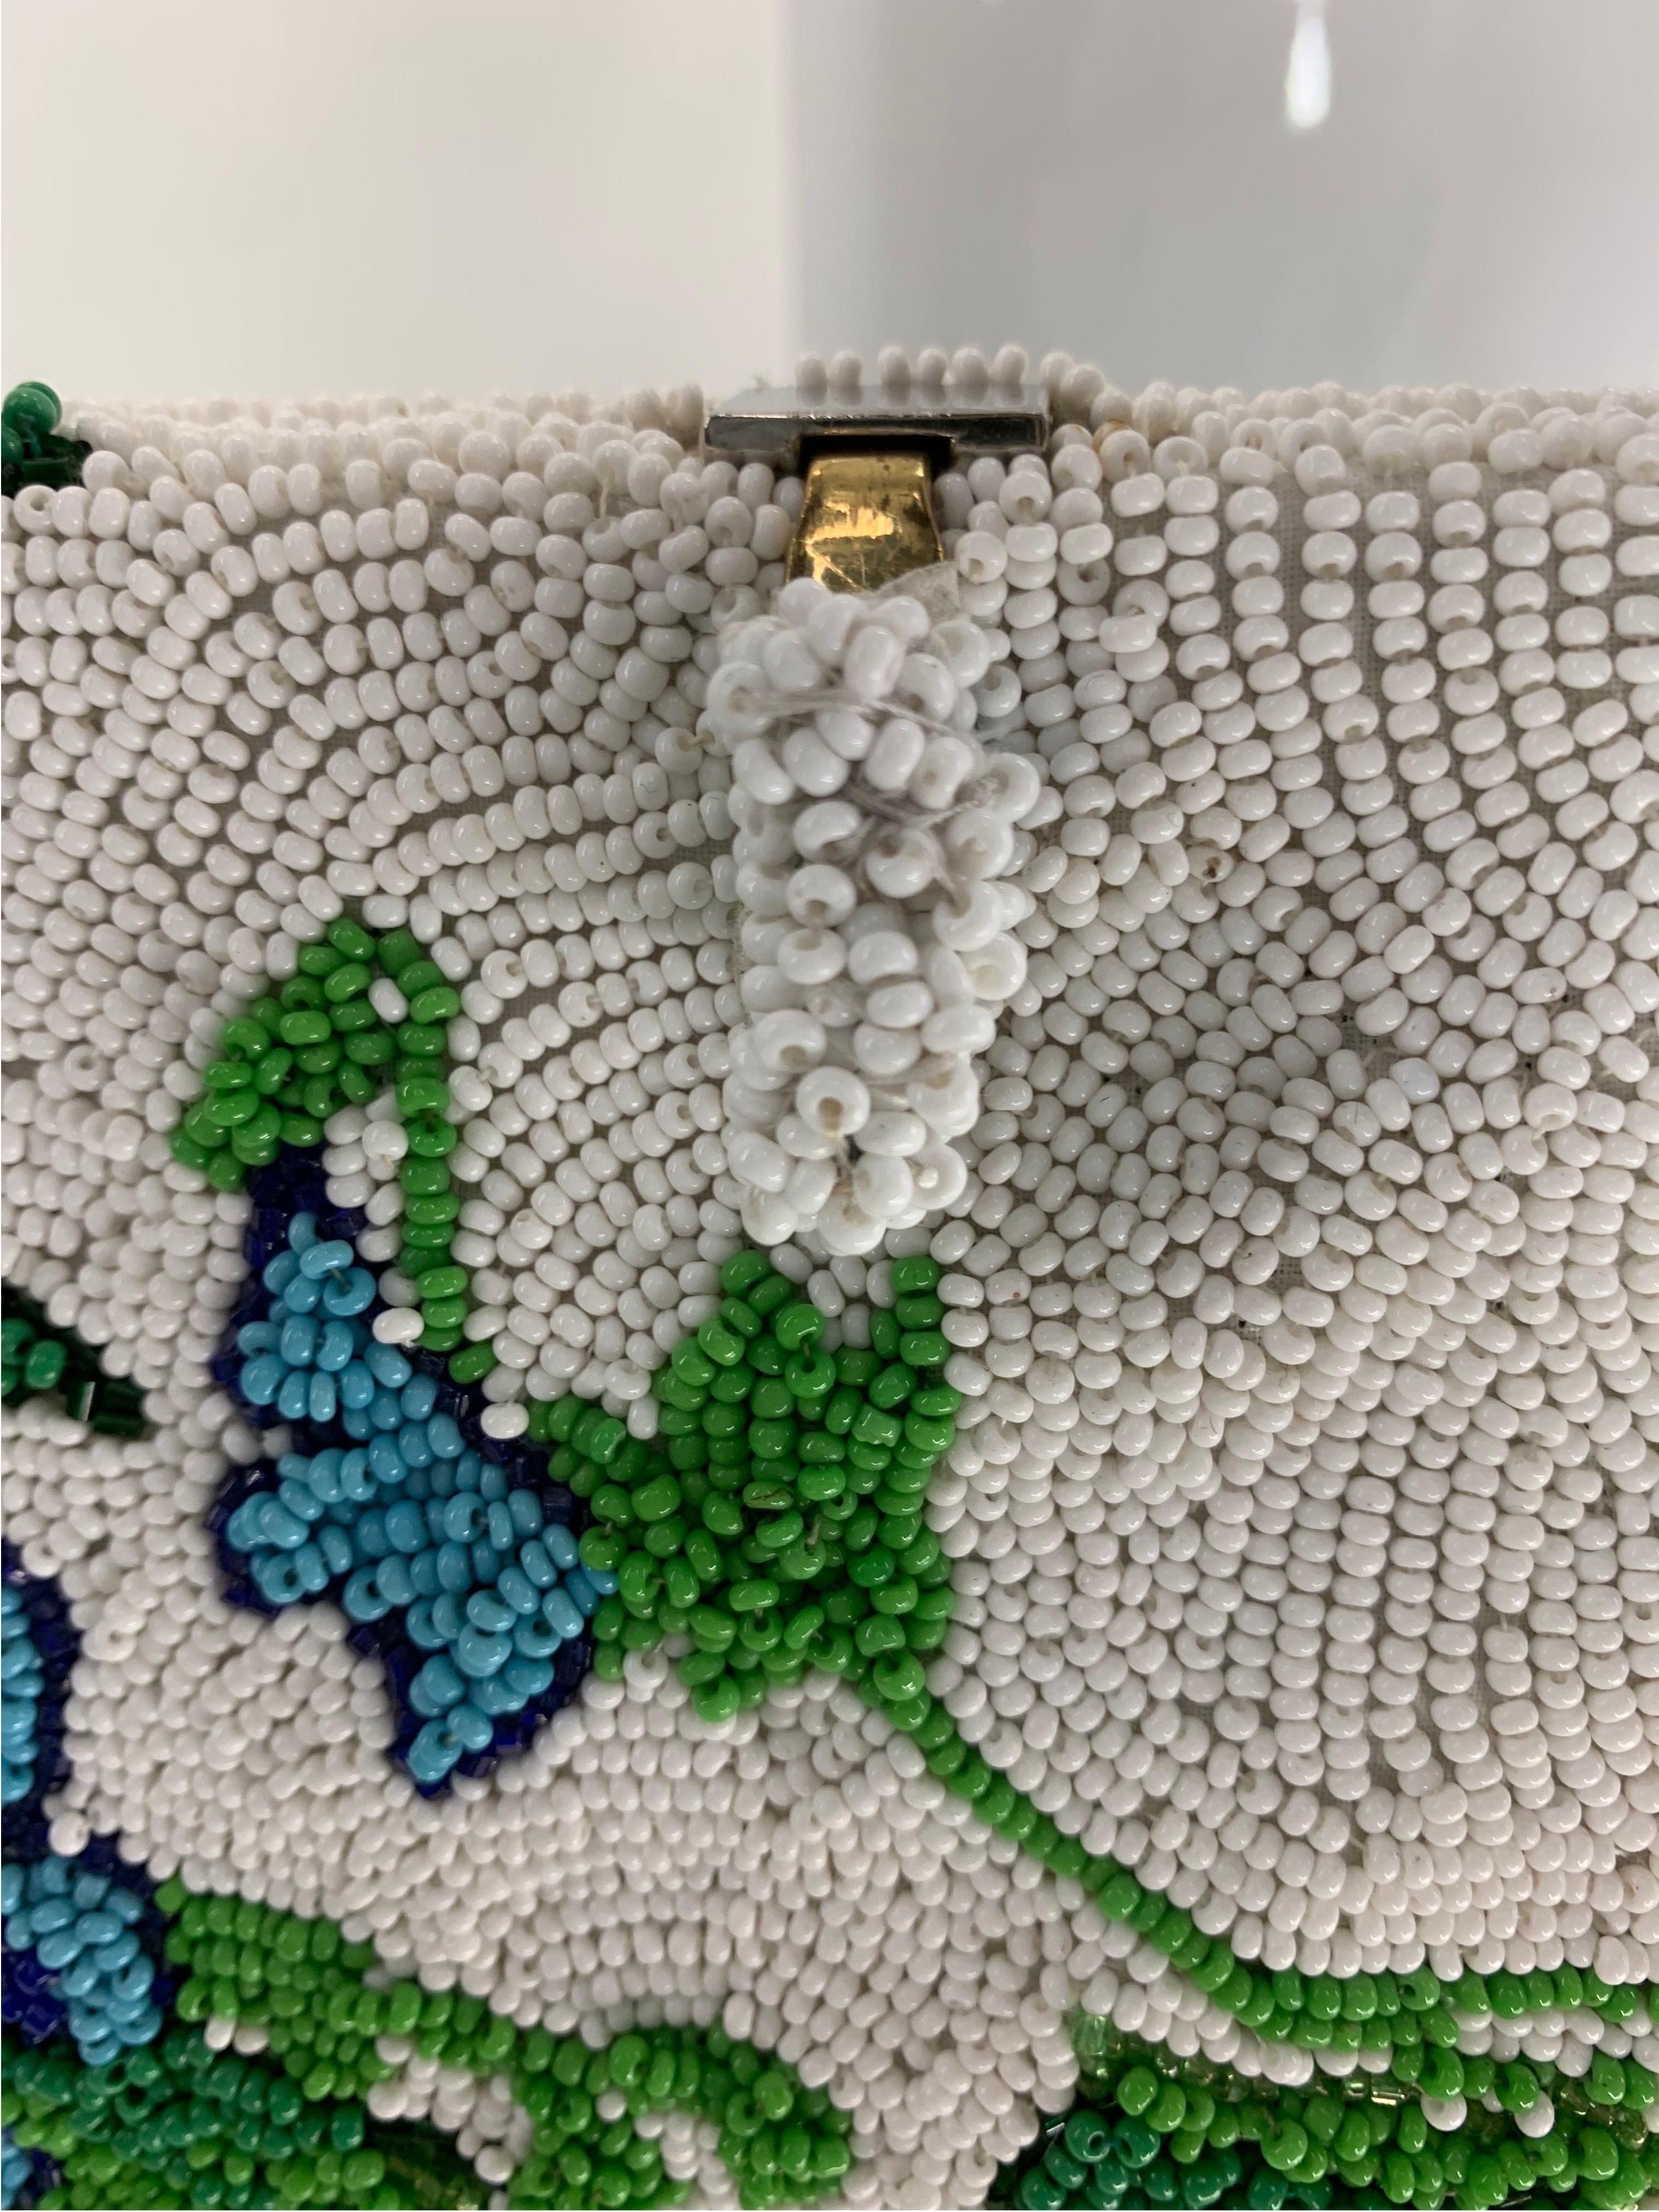 1950 Koret Tresor Stunning Floral Beaded Handbag In Green & Blue On White Ground In Excellent Condition For Sale In Gresham, OR